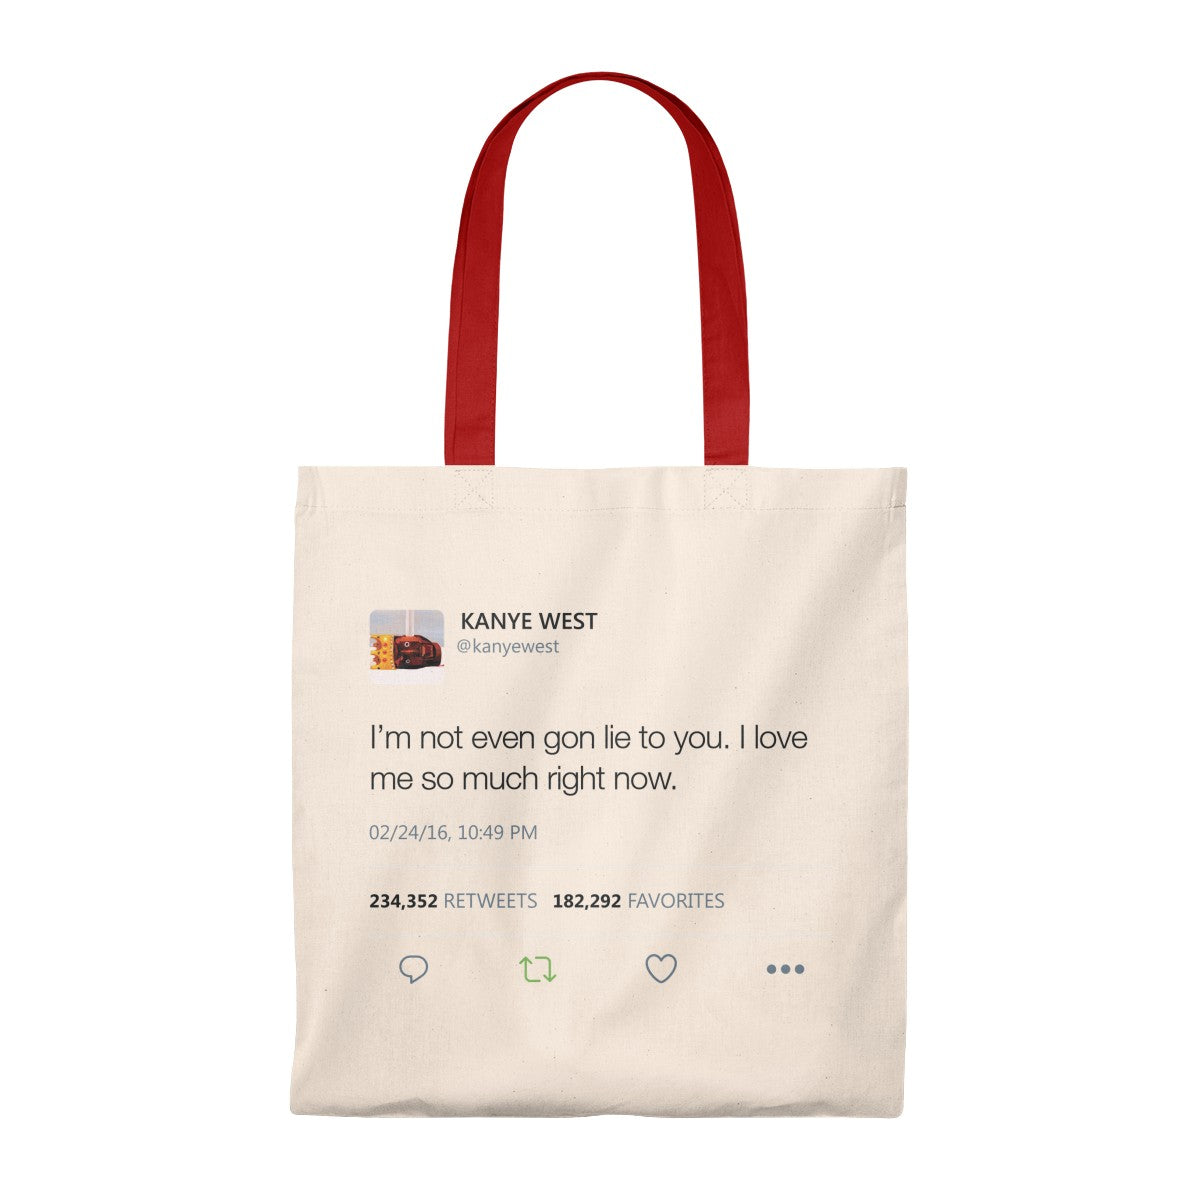 I Love Me So Much Right Now Kanye West Tweet Tote Bag-Natural/Red-Archethype